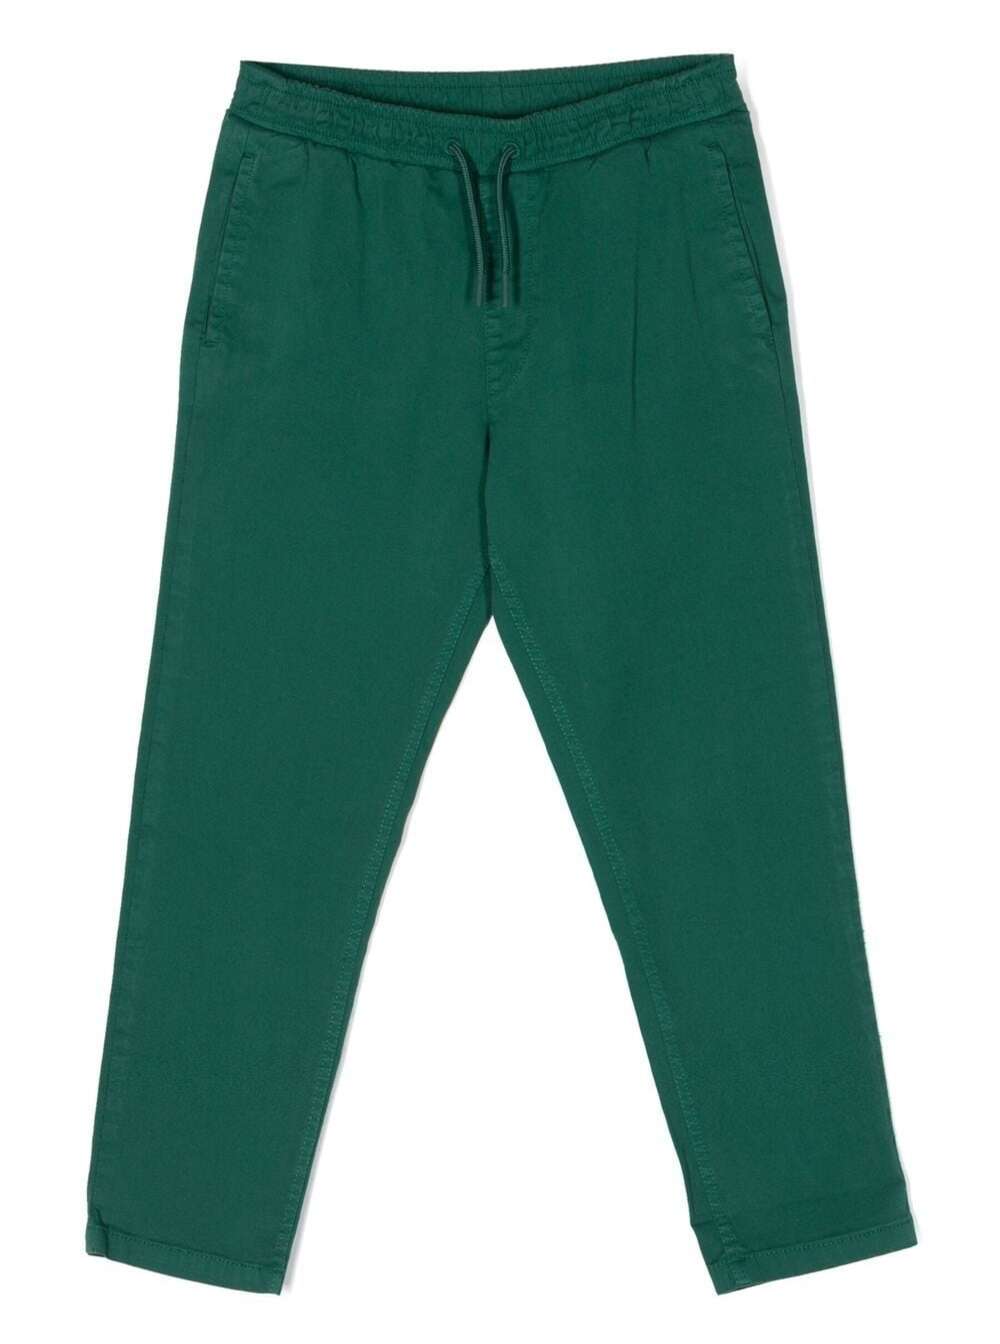 KENZO GREEN TROUSERS WITH DRAWSTRING IN COTTON BOY